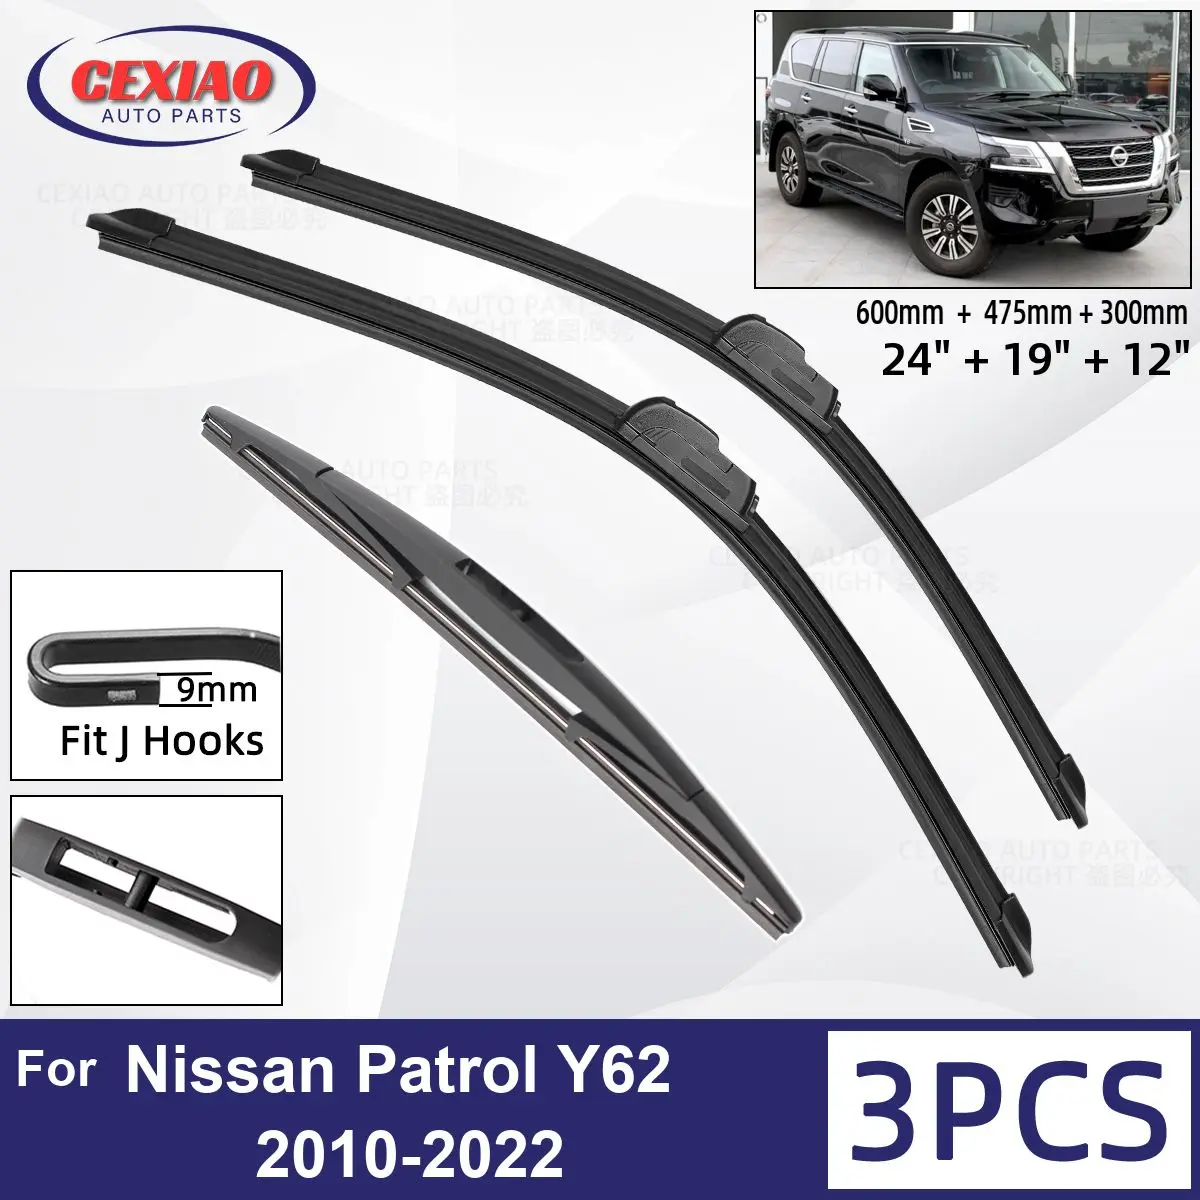 

For Nissan Patrol Y62 2010-2022 Car Front Rear Wiper Blades Soft Rubber Windscreen Wipers Auto Windshield 24"+19"+12" 2020 2021